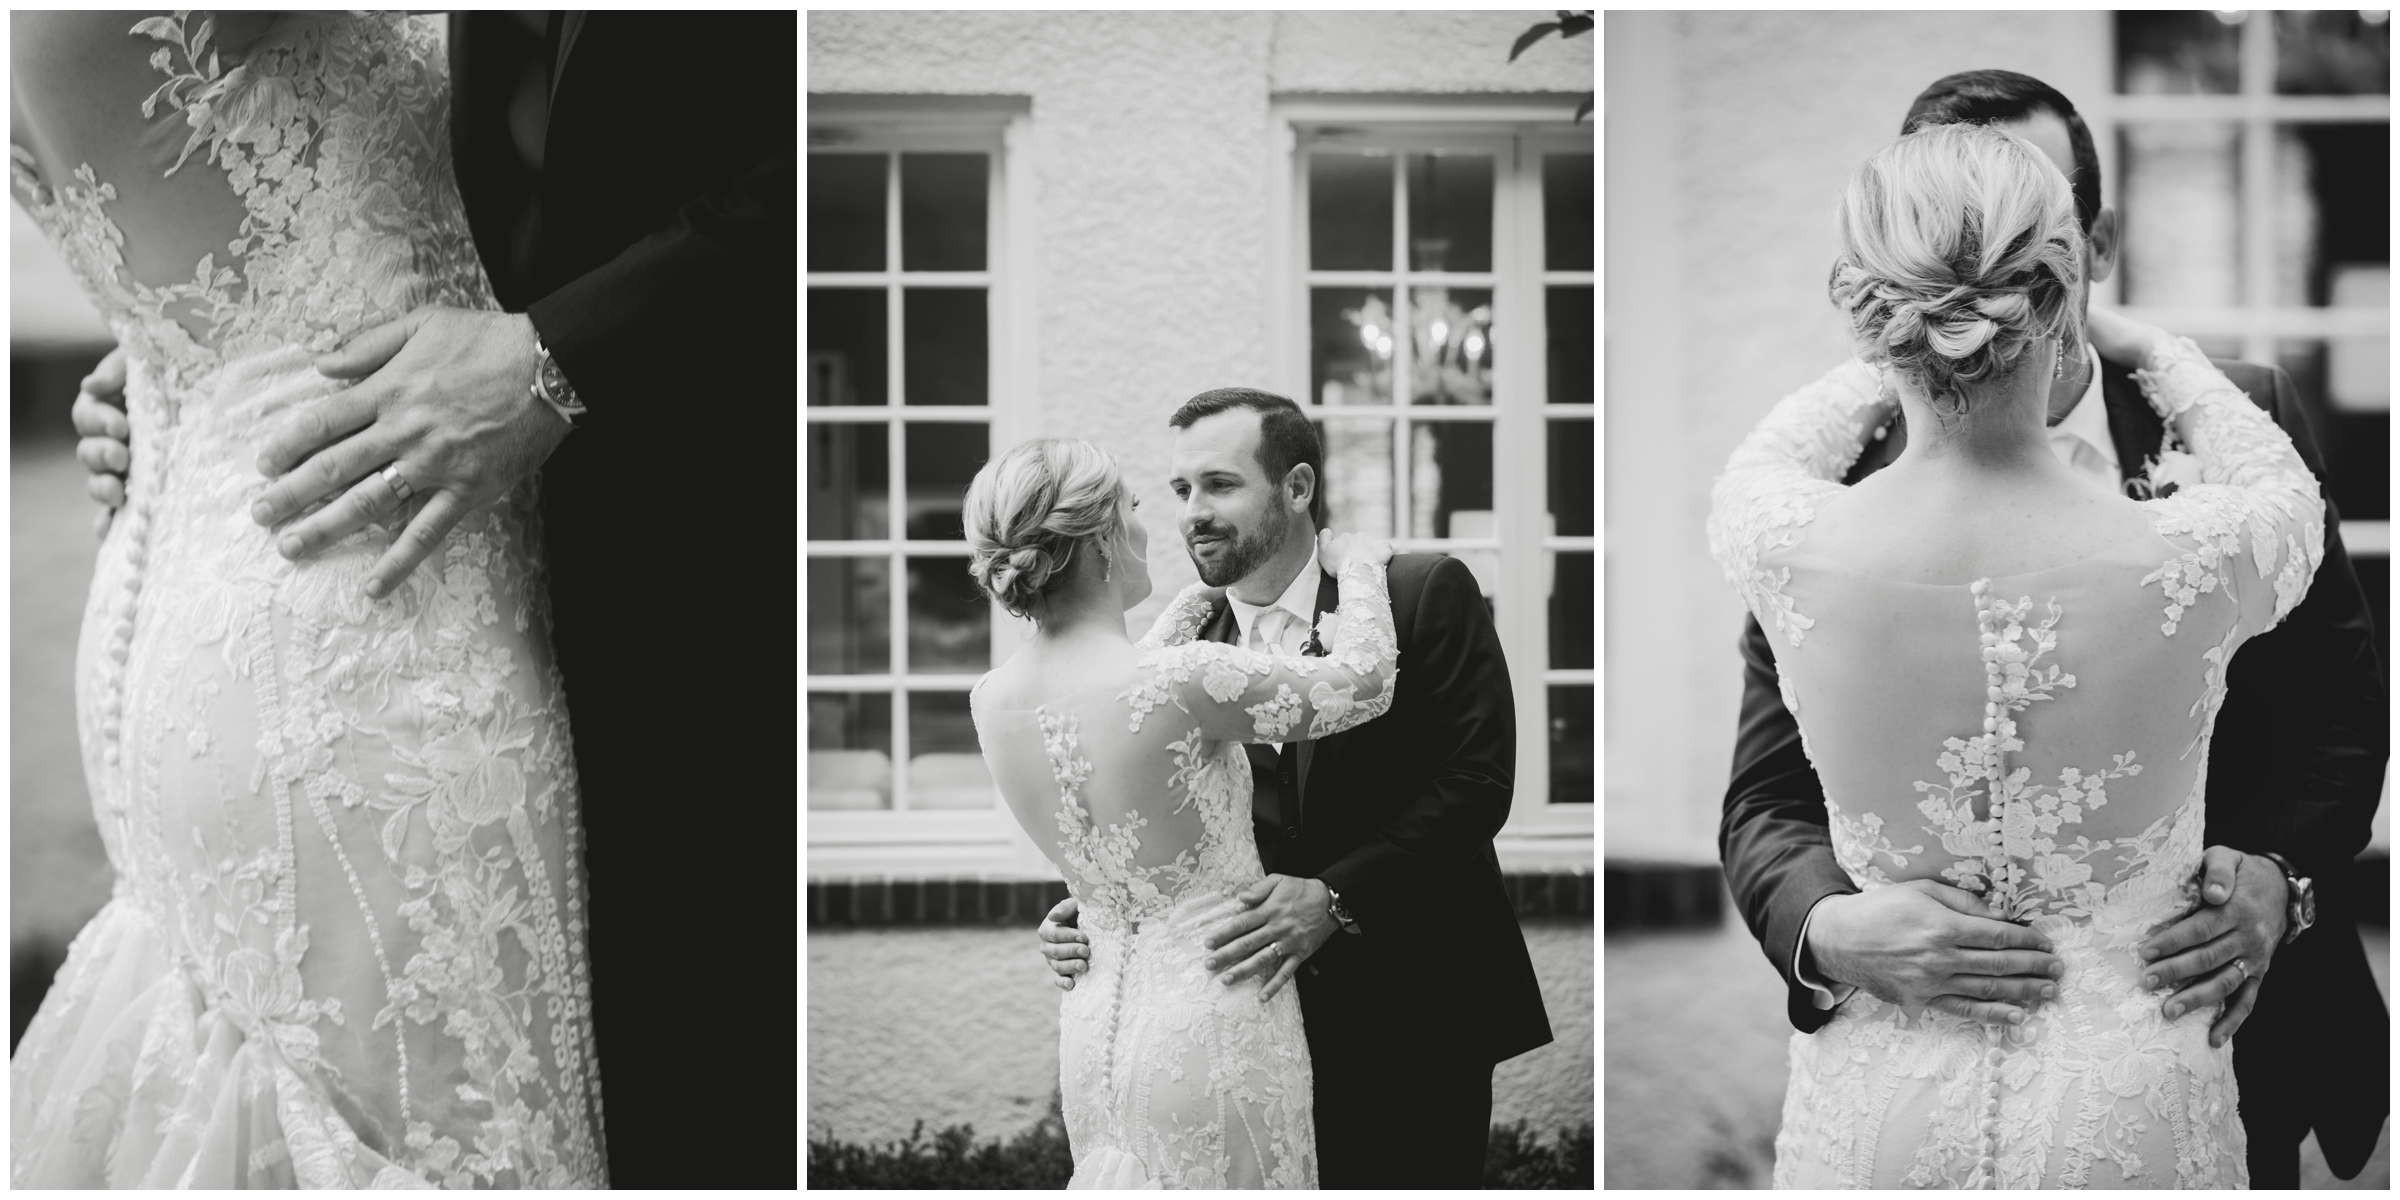 first dance at intimate Denver wedding at private home by Plum Pretty Photography